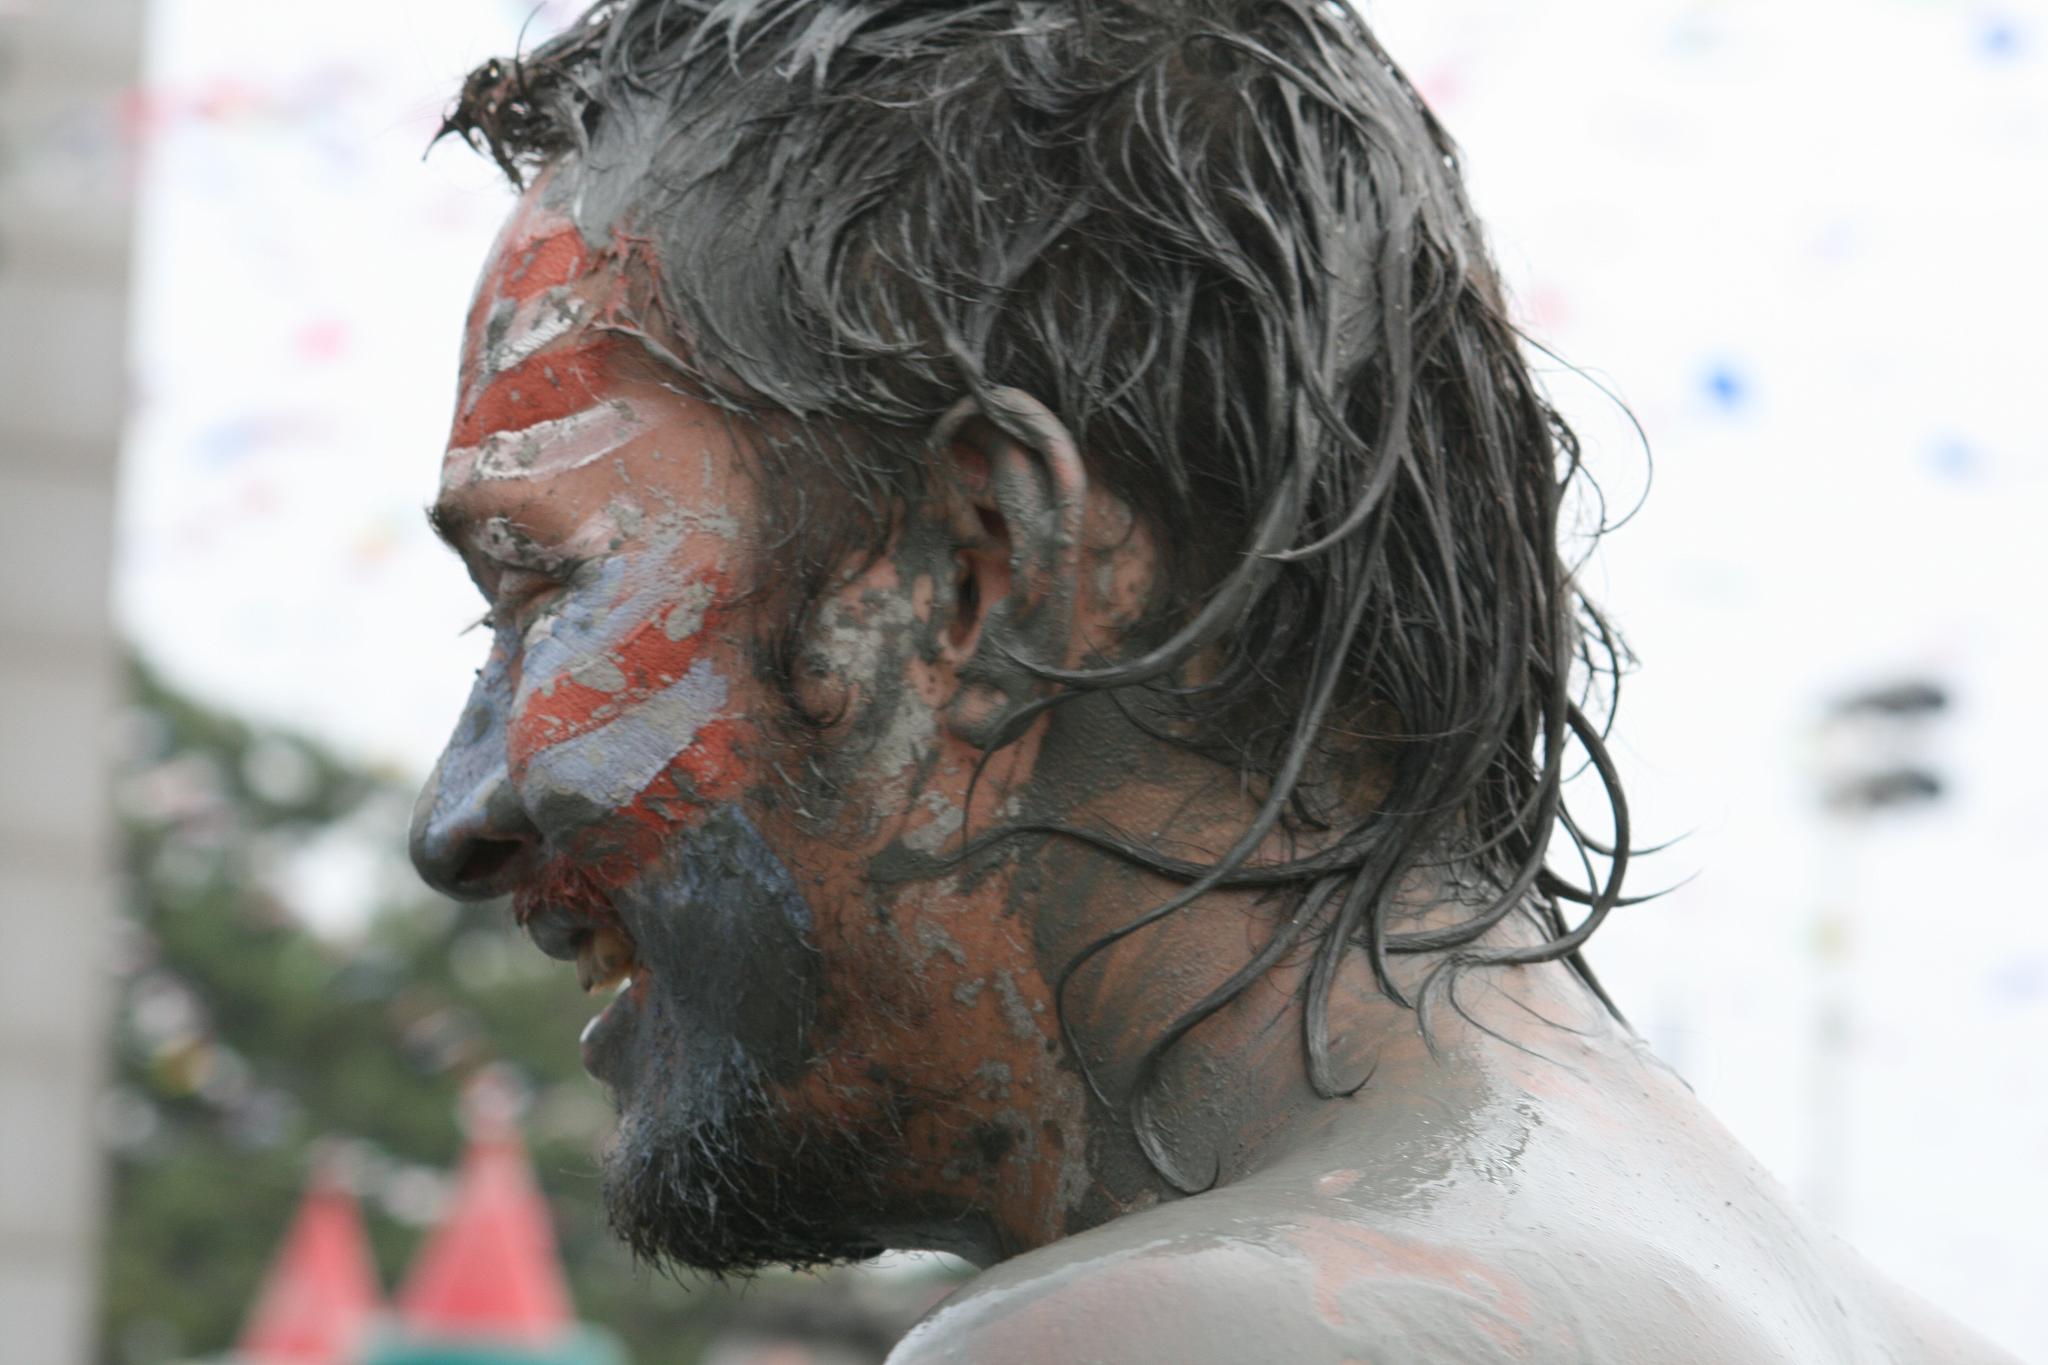 the face of a man covered in white and red, with his hair pulled back